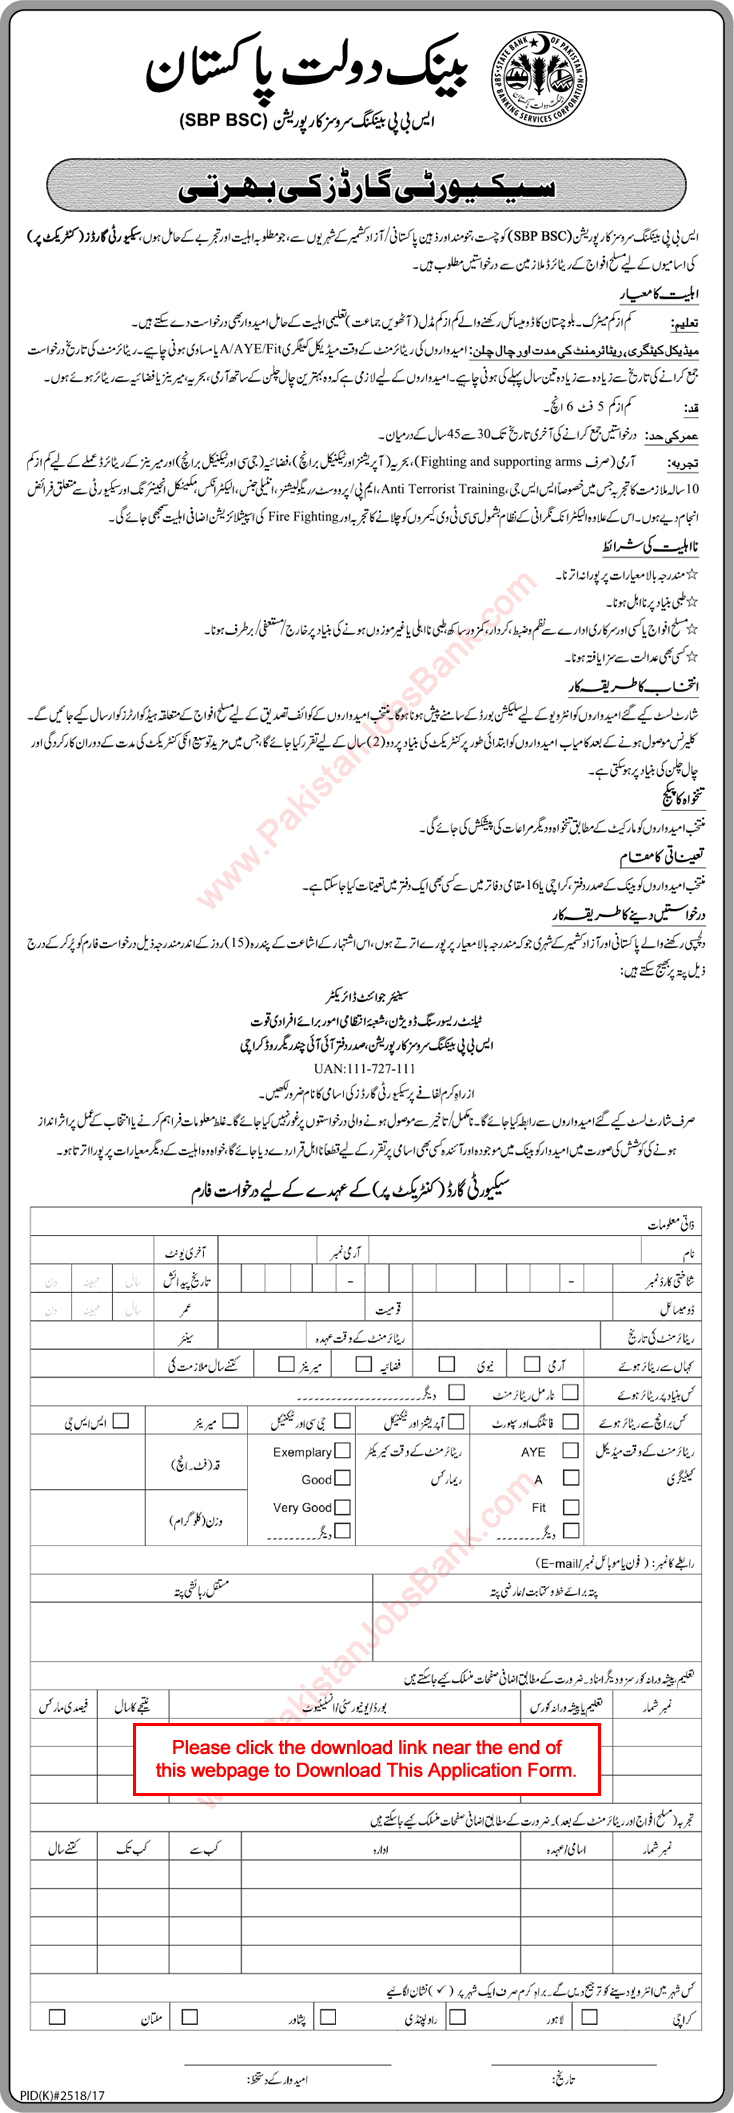 Security Guard Jobs in State Bank of Pakistan 2018 January Application Form Download SBP Latest